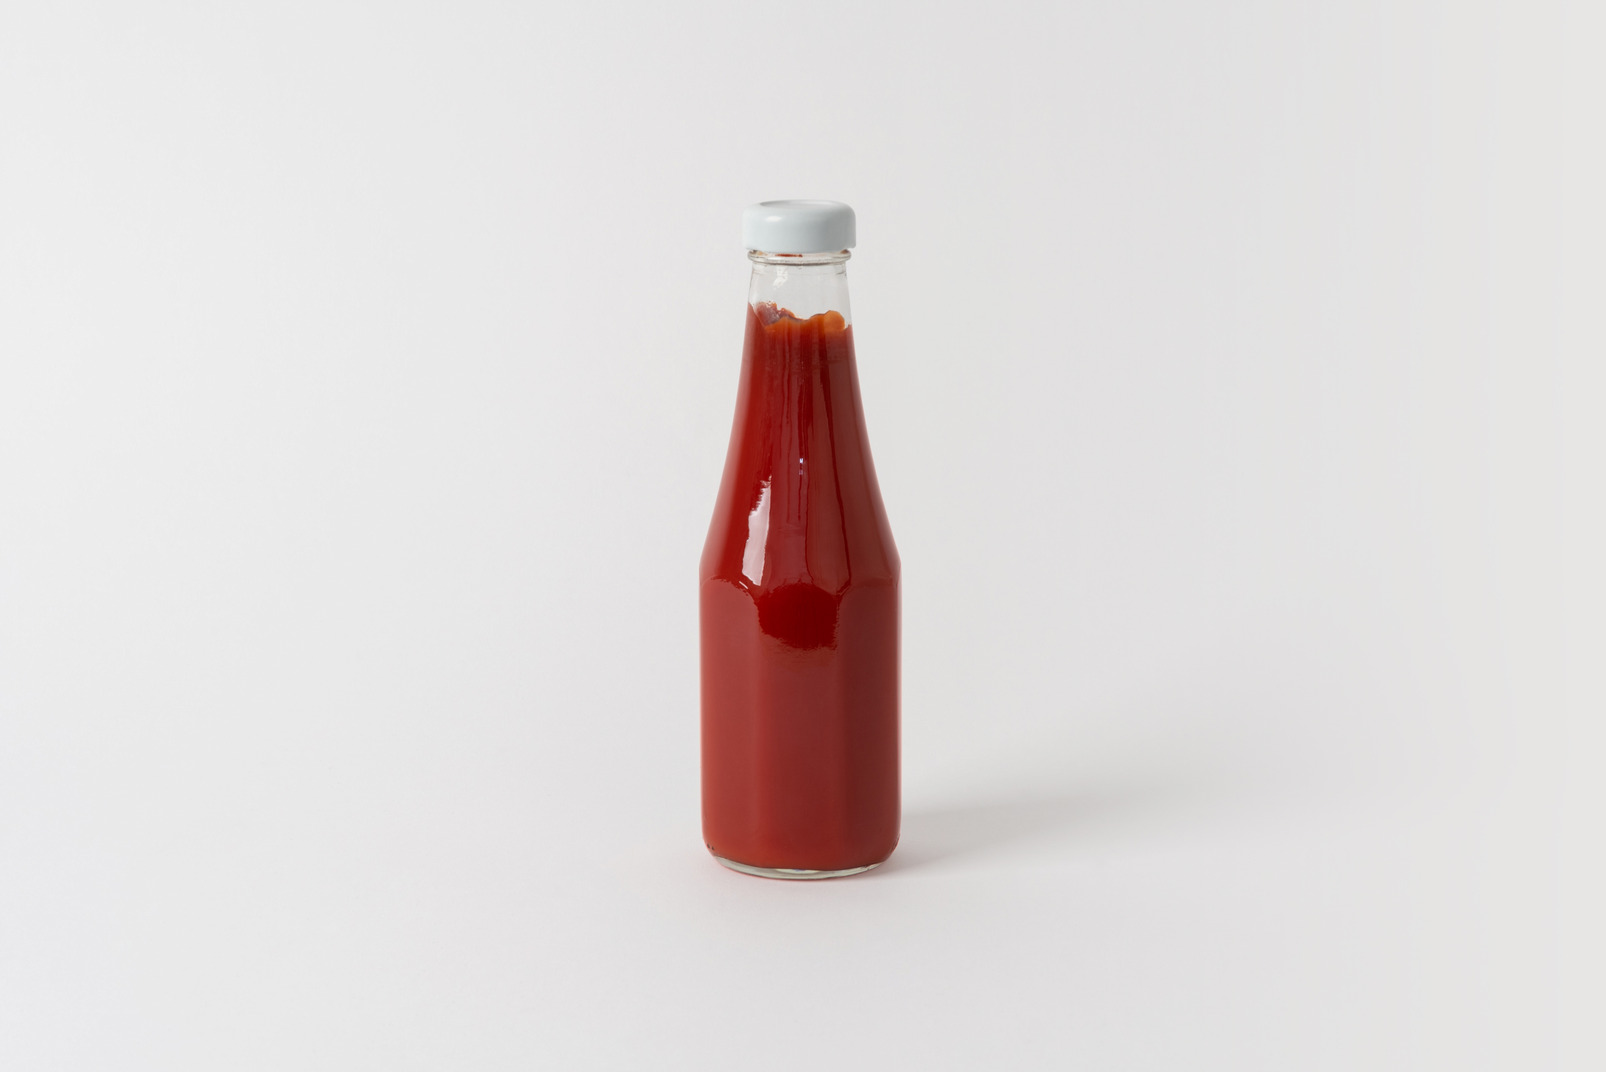 Tomato sauce in a glass bottle